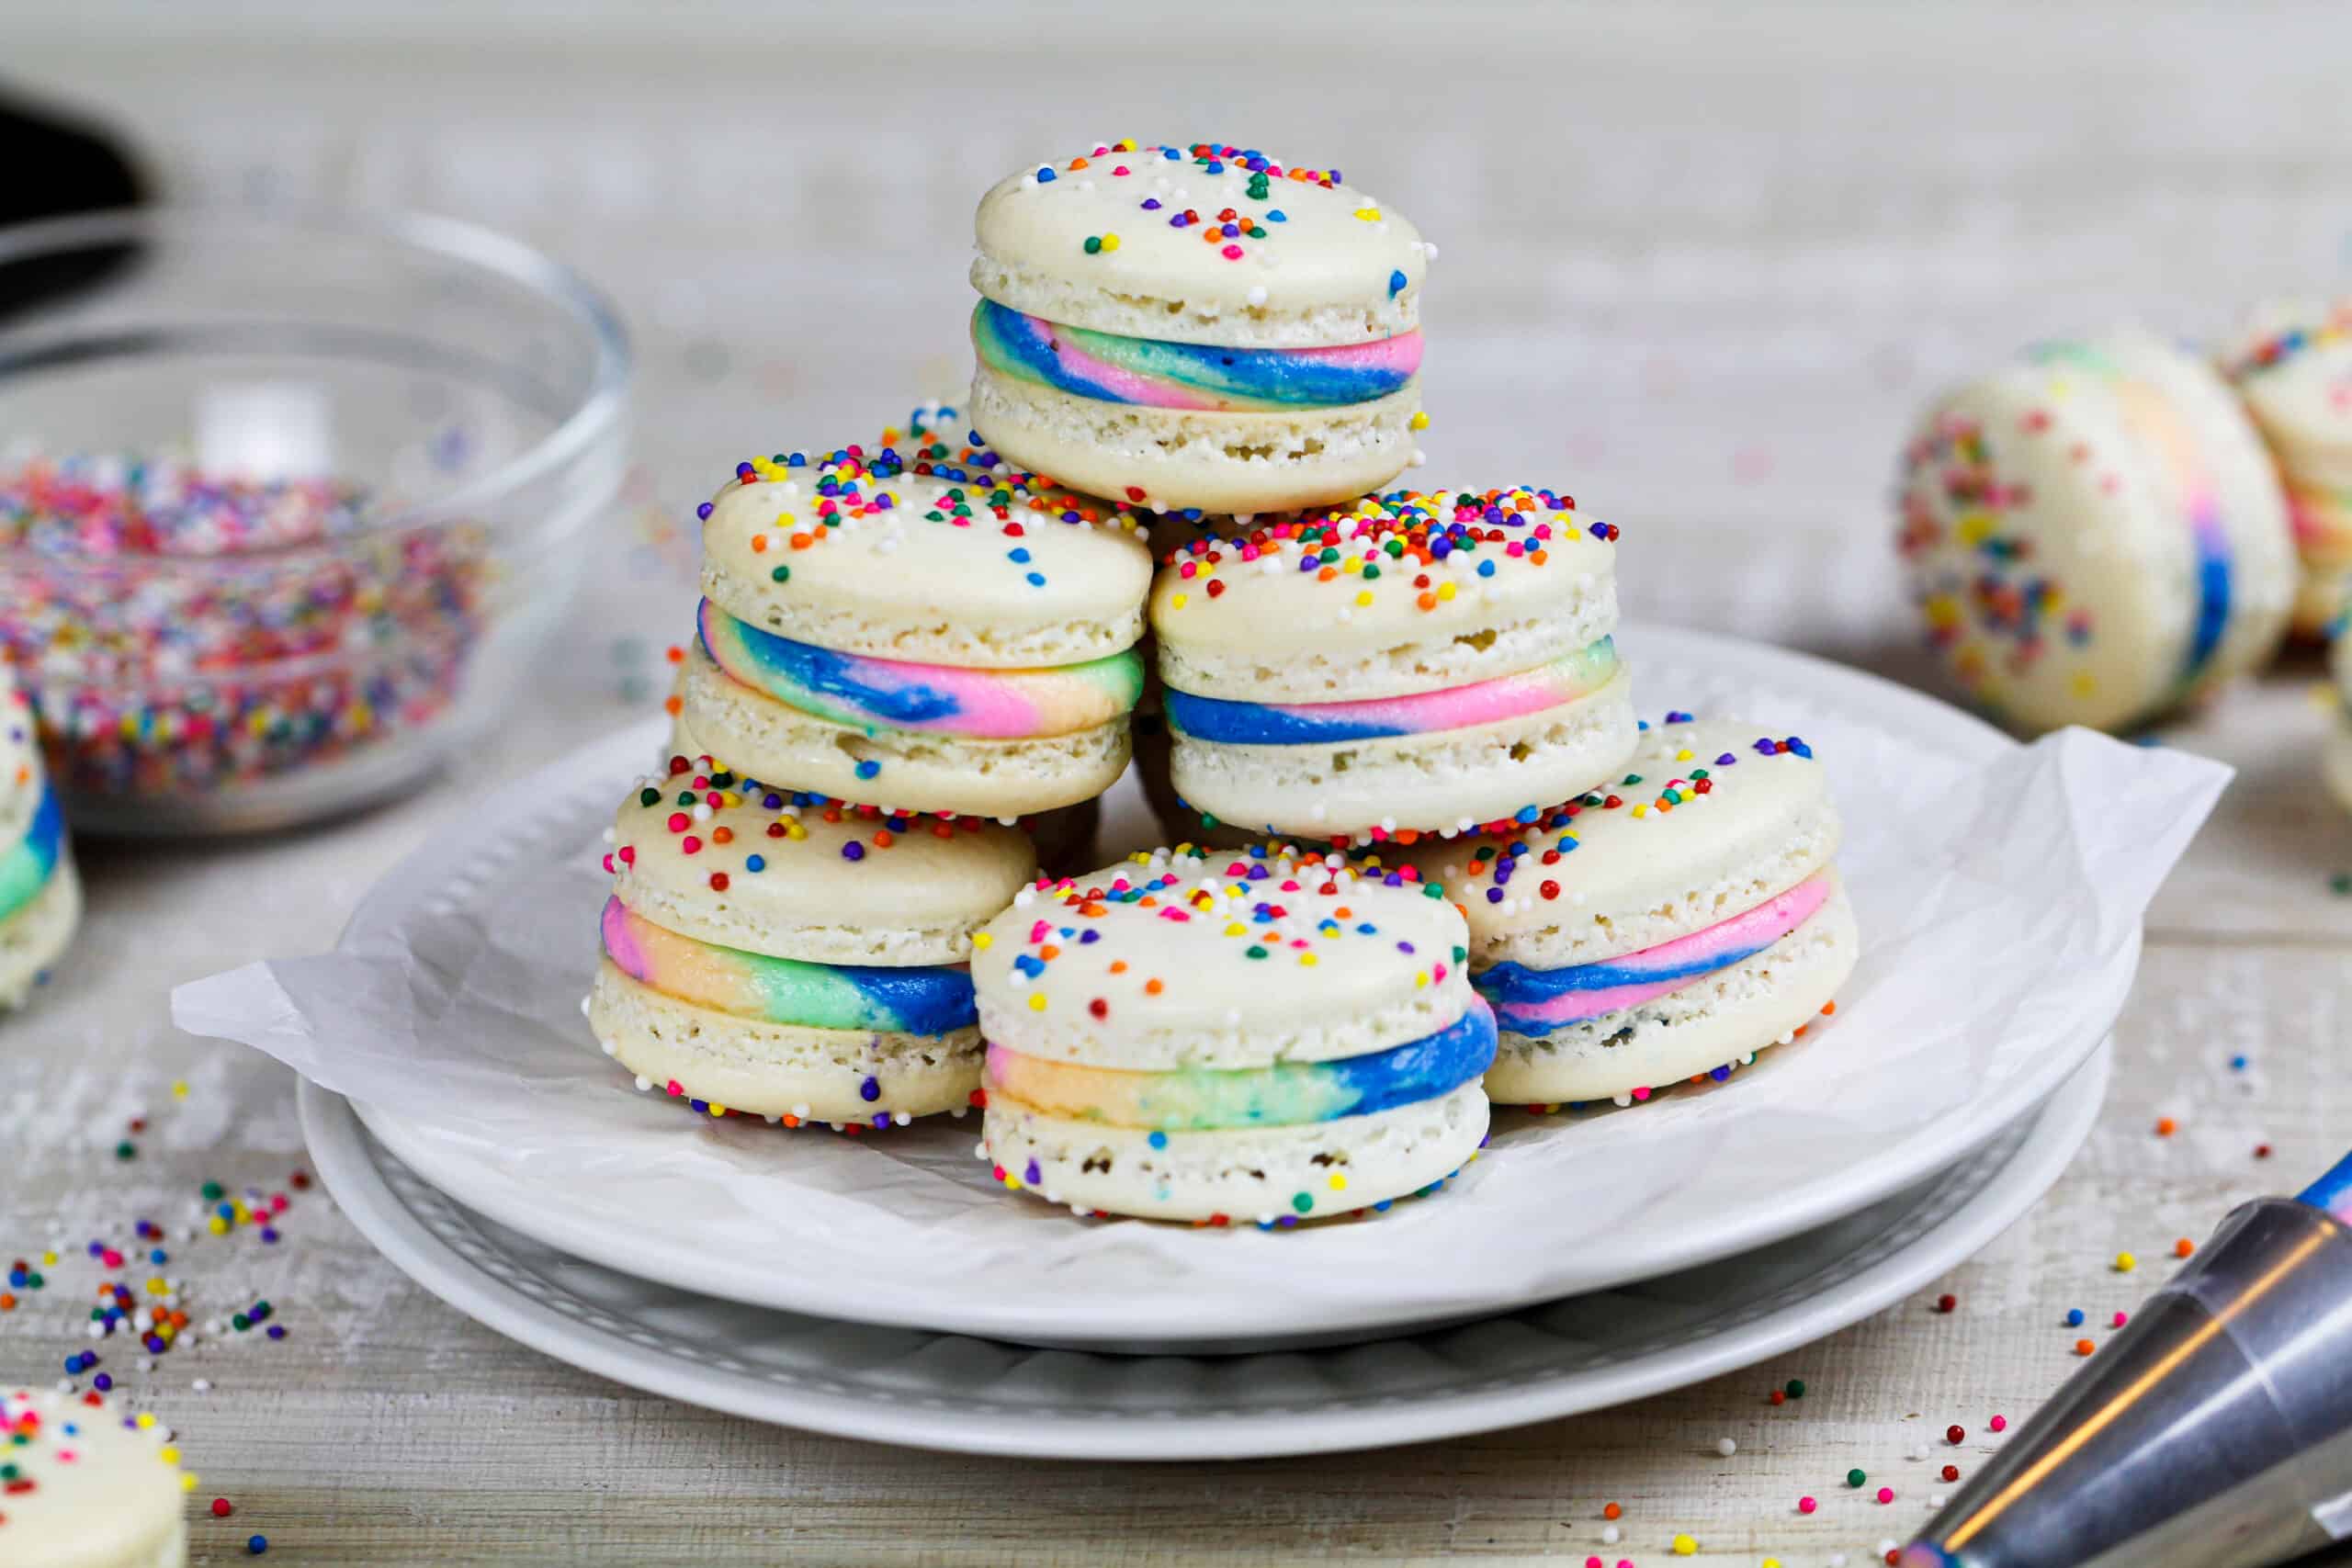 image of rainbow macarons stacked on a plate